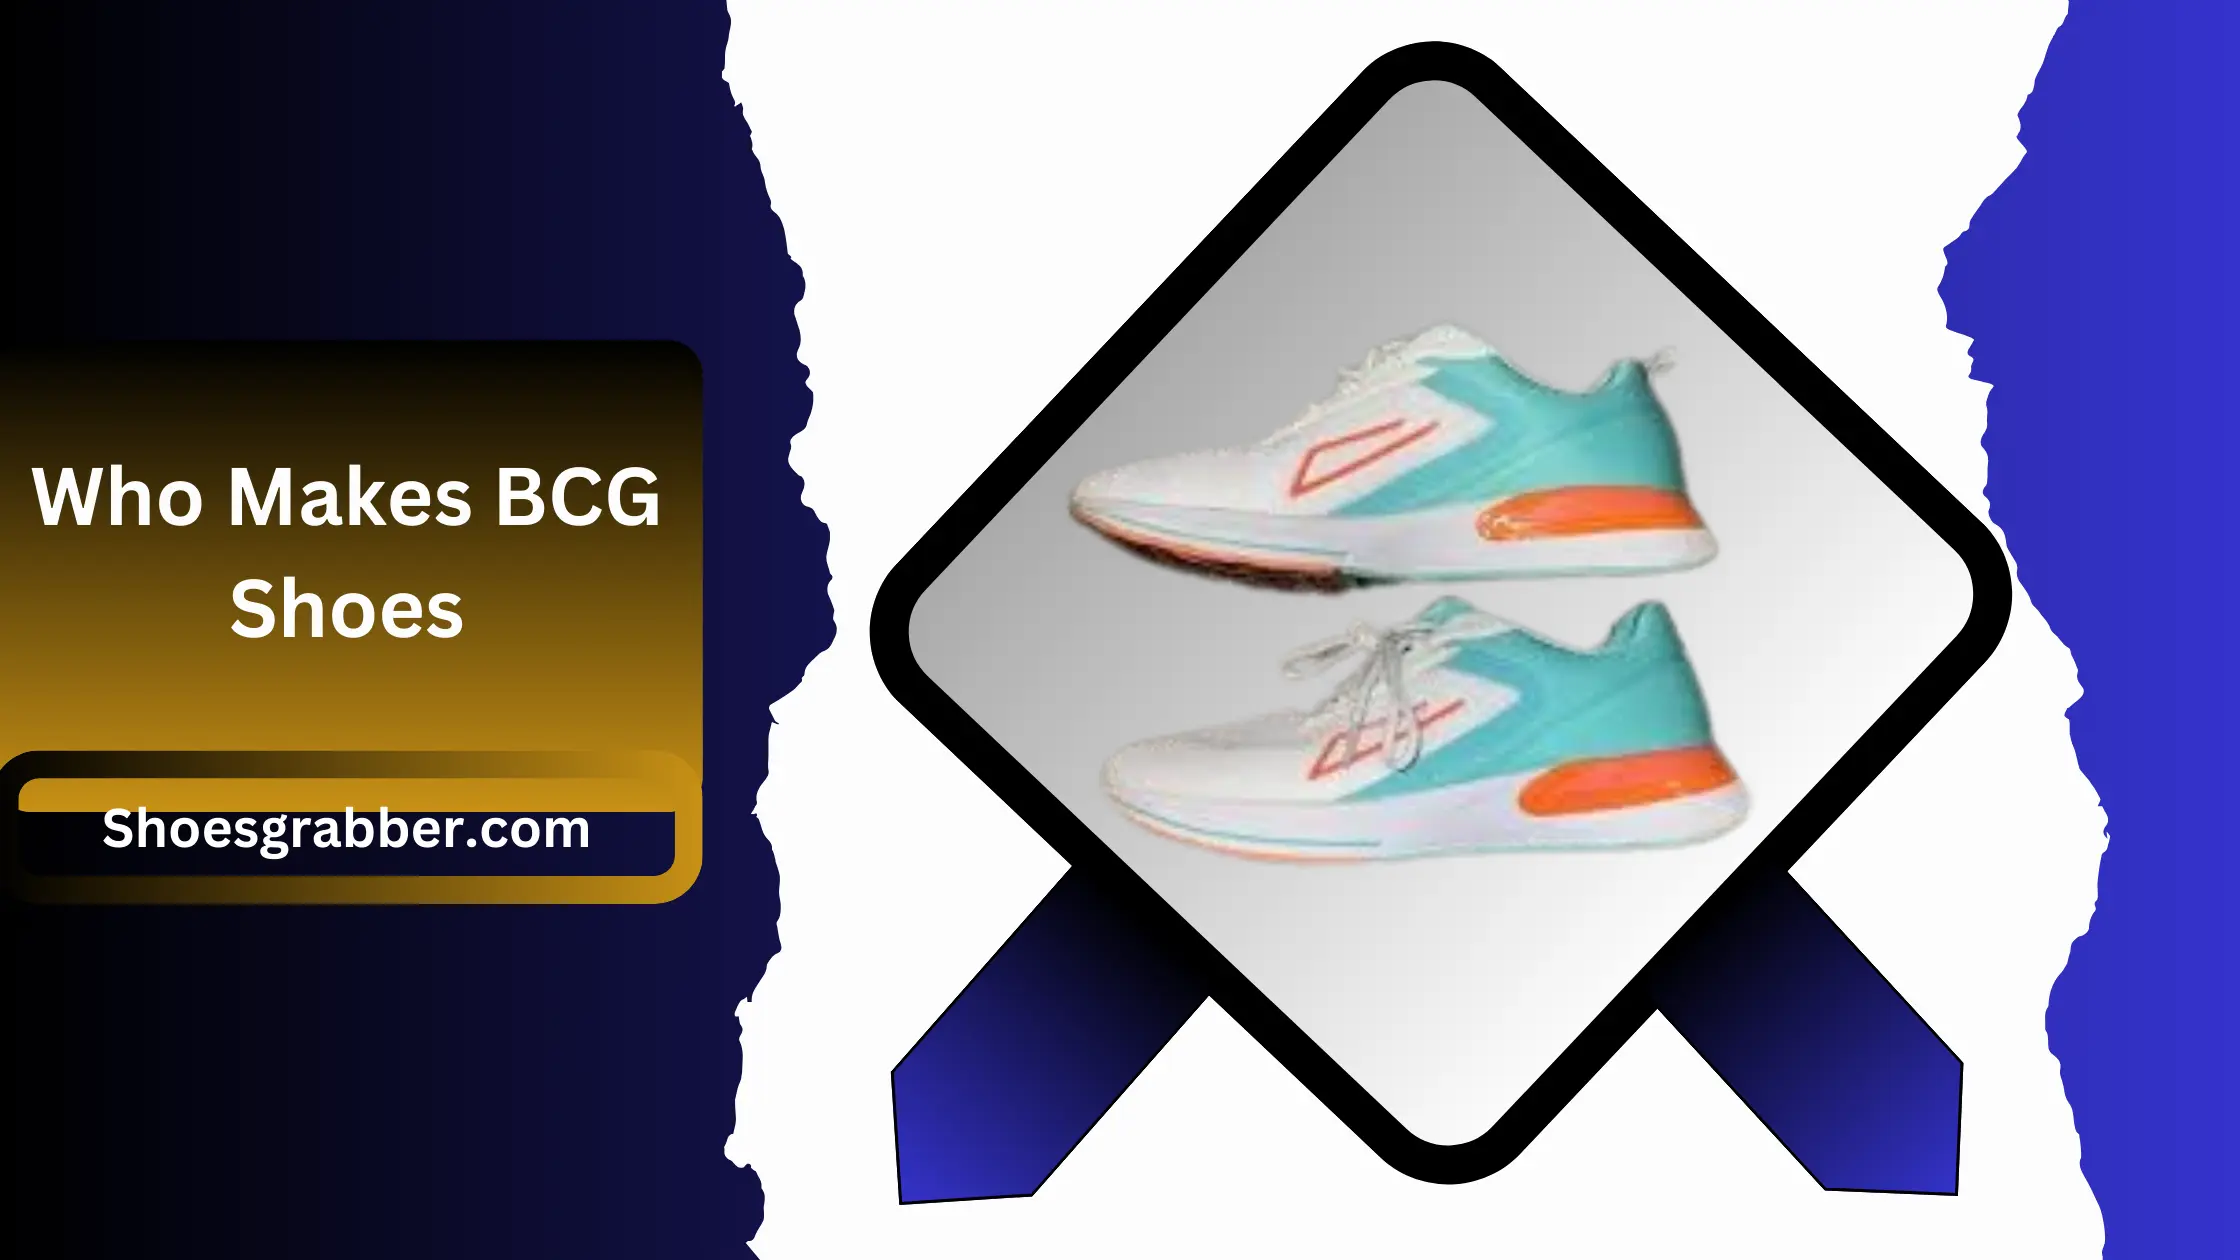 Everything You Need to Know About Who Makes BCG Shoes